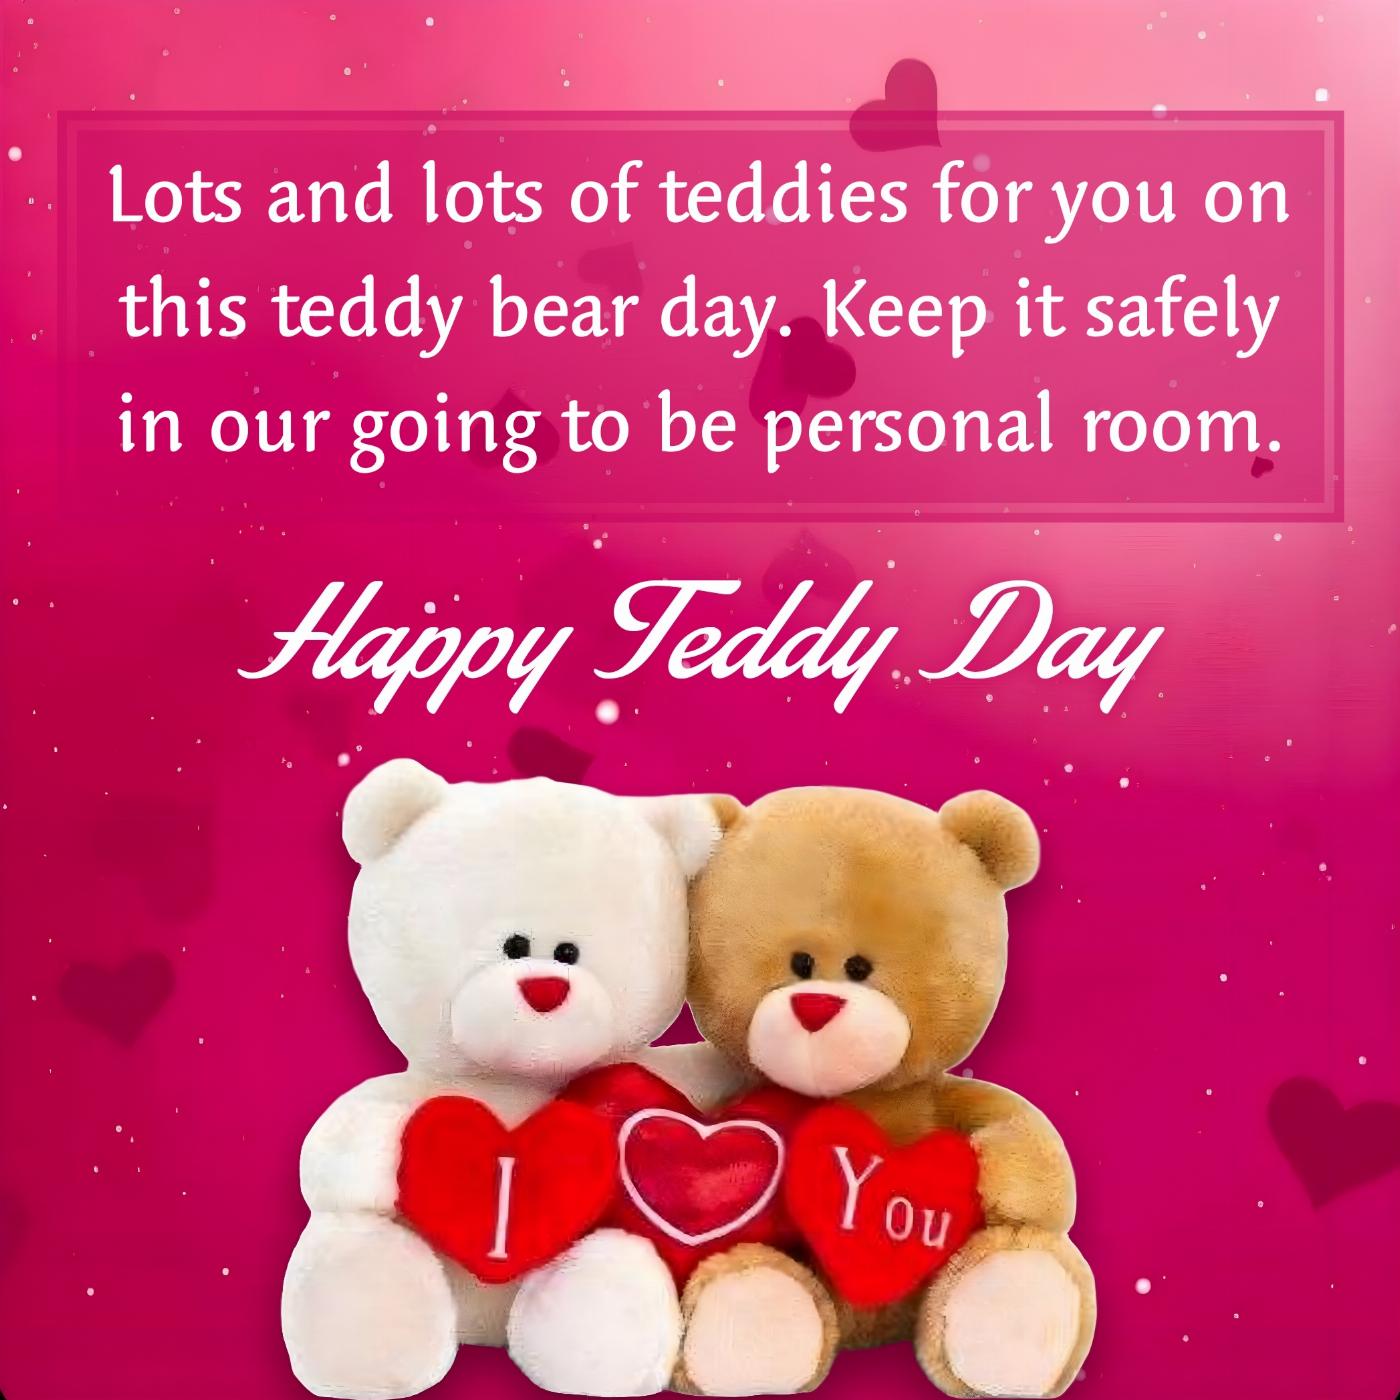 Lots and lots of teddies for you on this teddy bear day